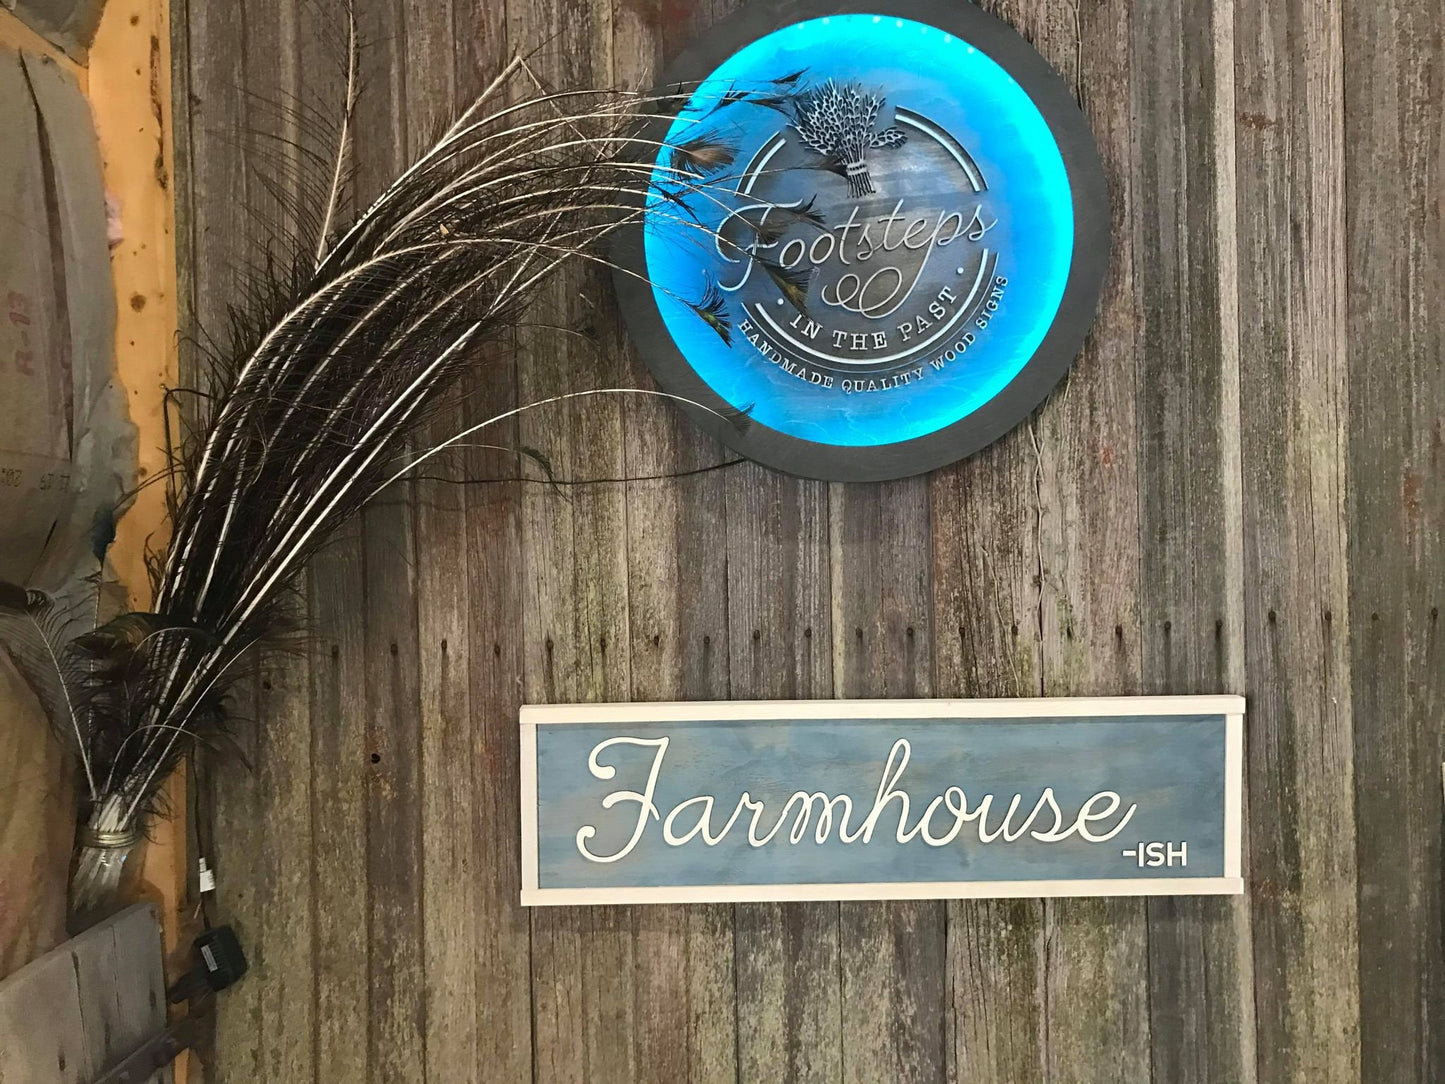 Farmhouse Farmhouse-Ish Sign Blue White Wood 3D Raised Text Country Rustic Primitive Wall Decor Shabby Chic Wall Art